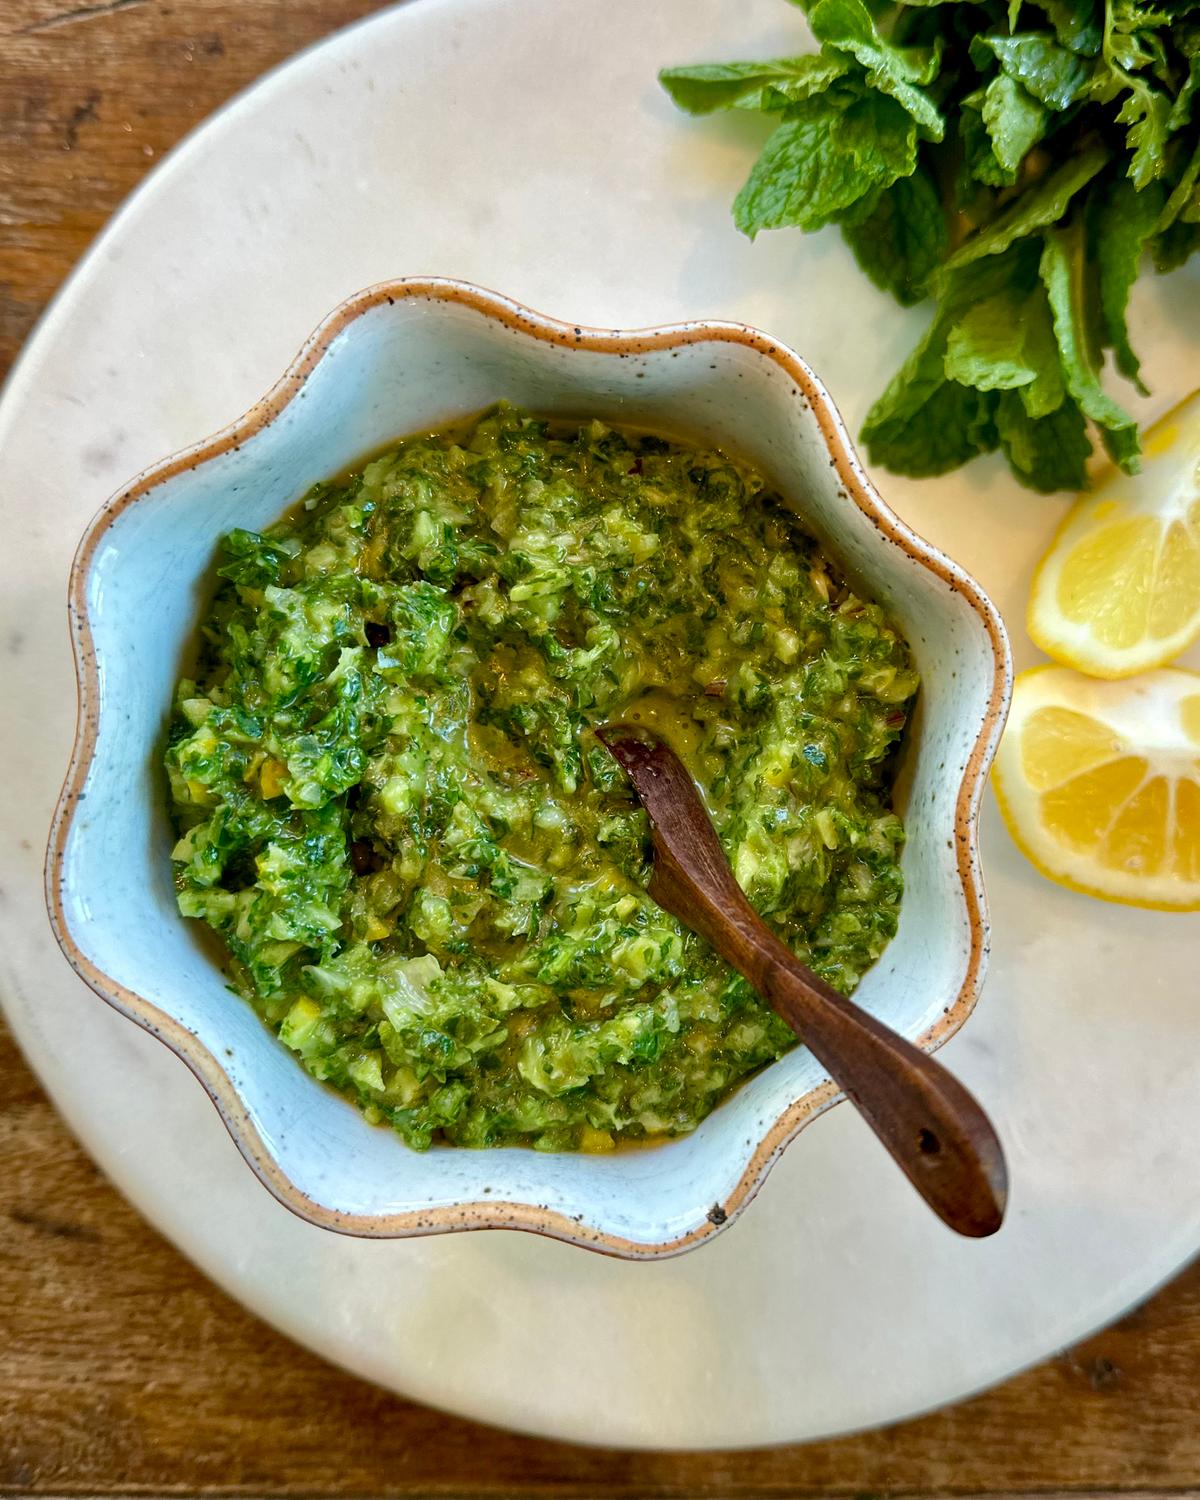 This salsa has a sweet and sharp citrus flavor, laced with skulking chile heat and pungent garlic. (Lynda Balslev for Tastefood)